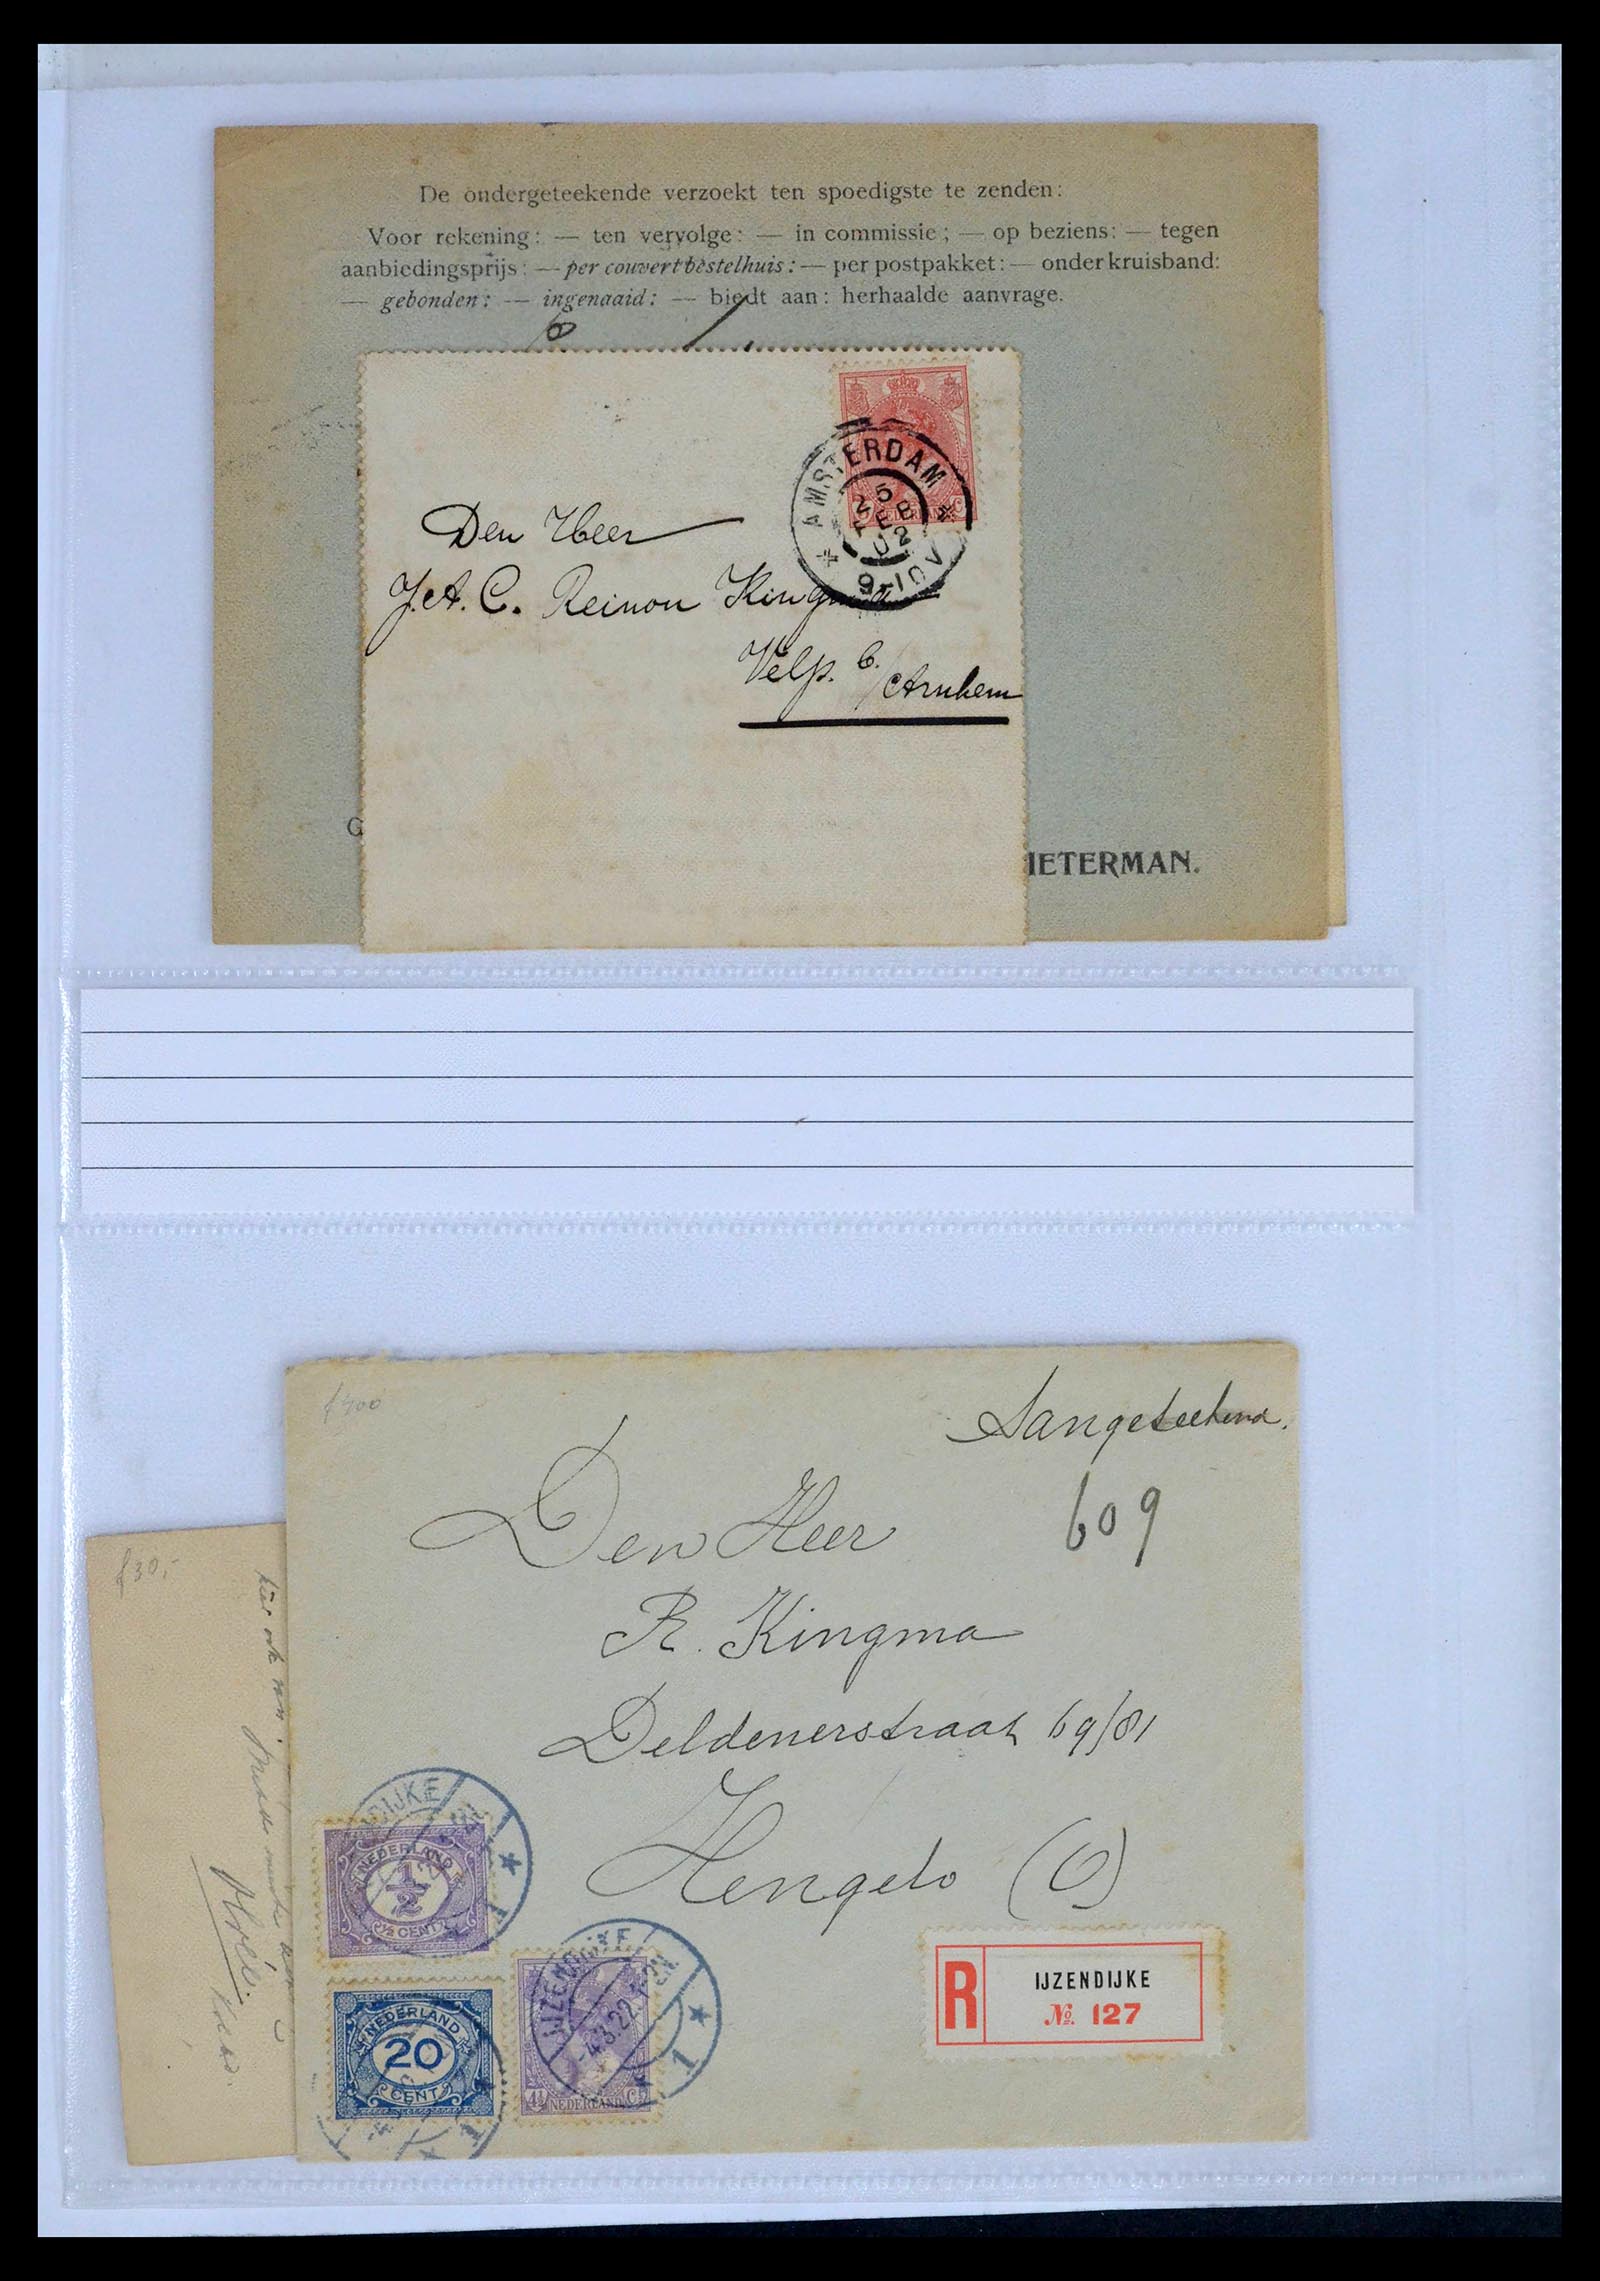 39429 0014 - Stamp collection 39429 Netherlands covers 1821-1955.